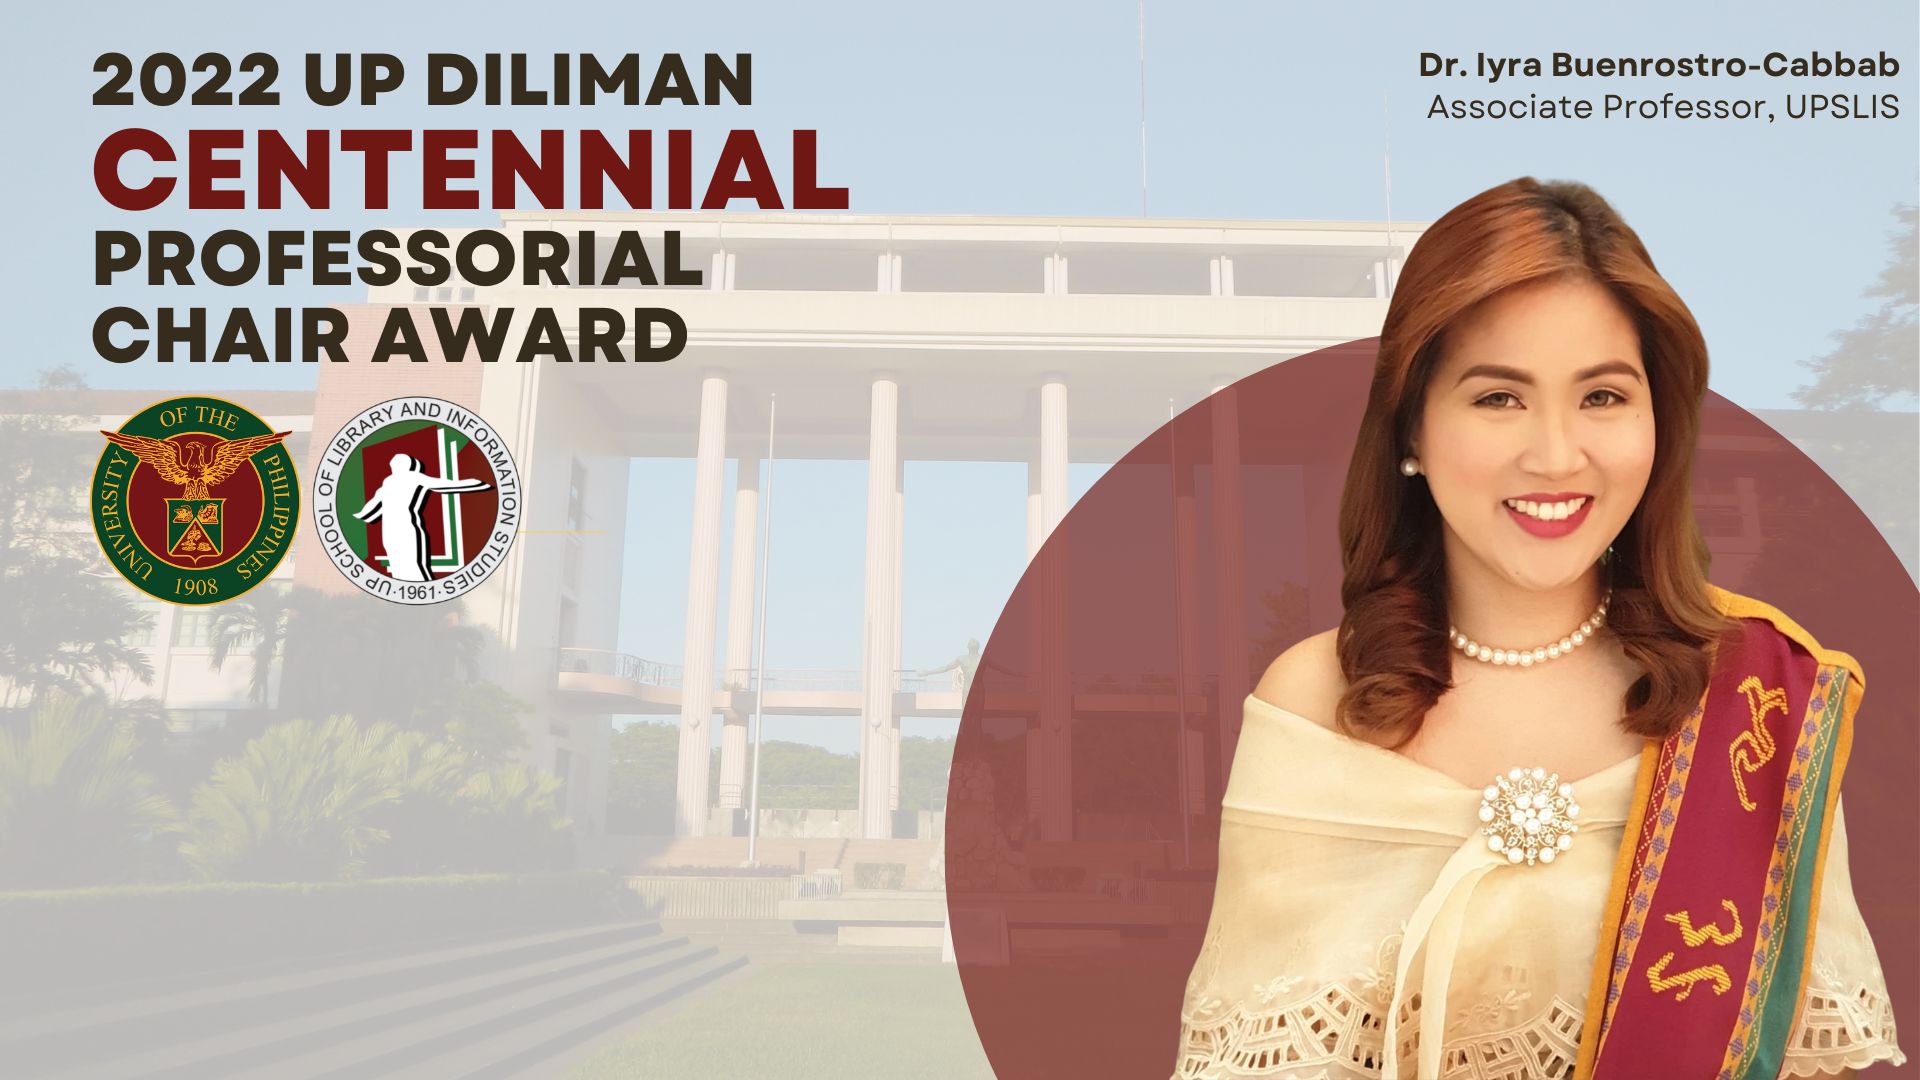 Dr. Iyra Buenrostro-Cabbab awarded 2022 UP Centennial Professorial Chair